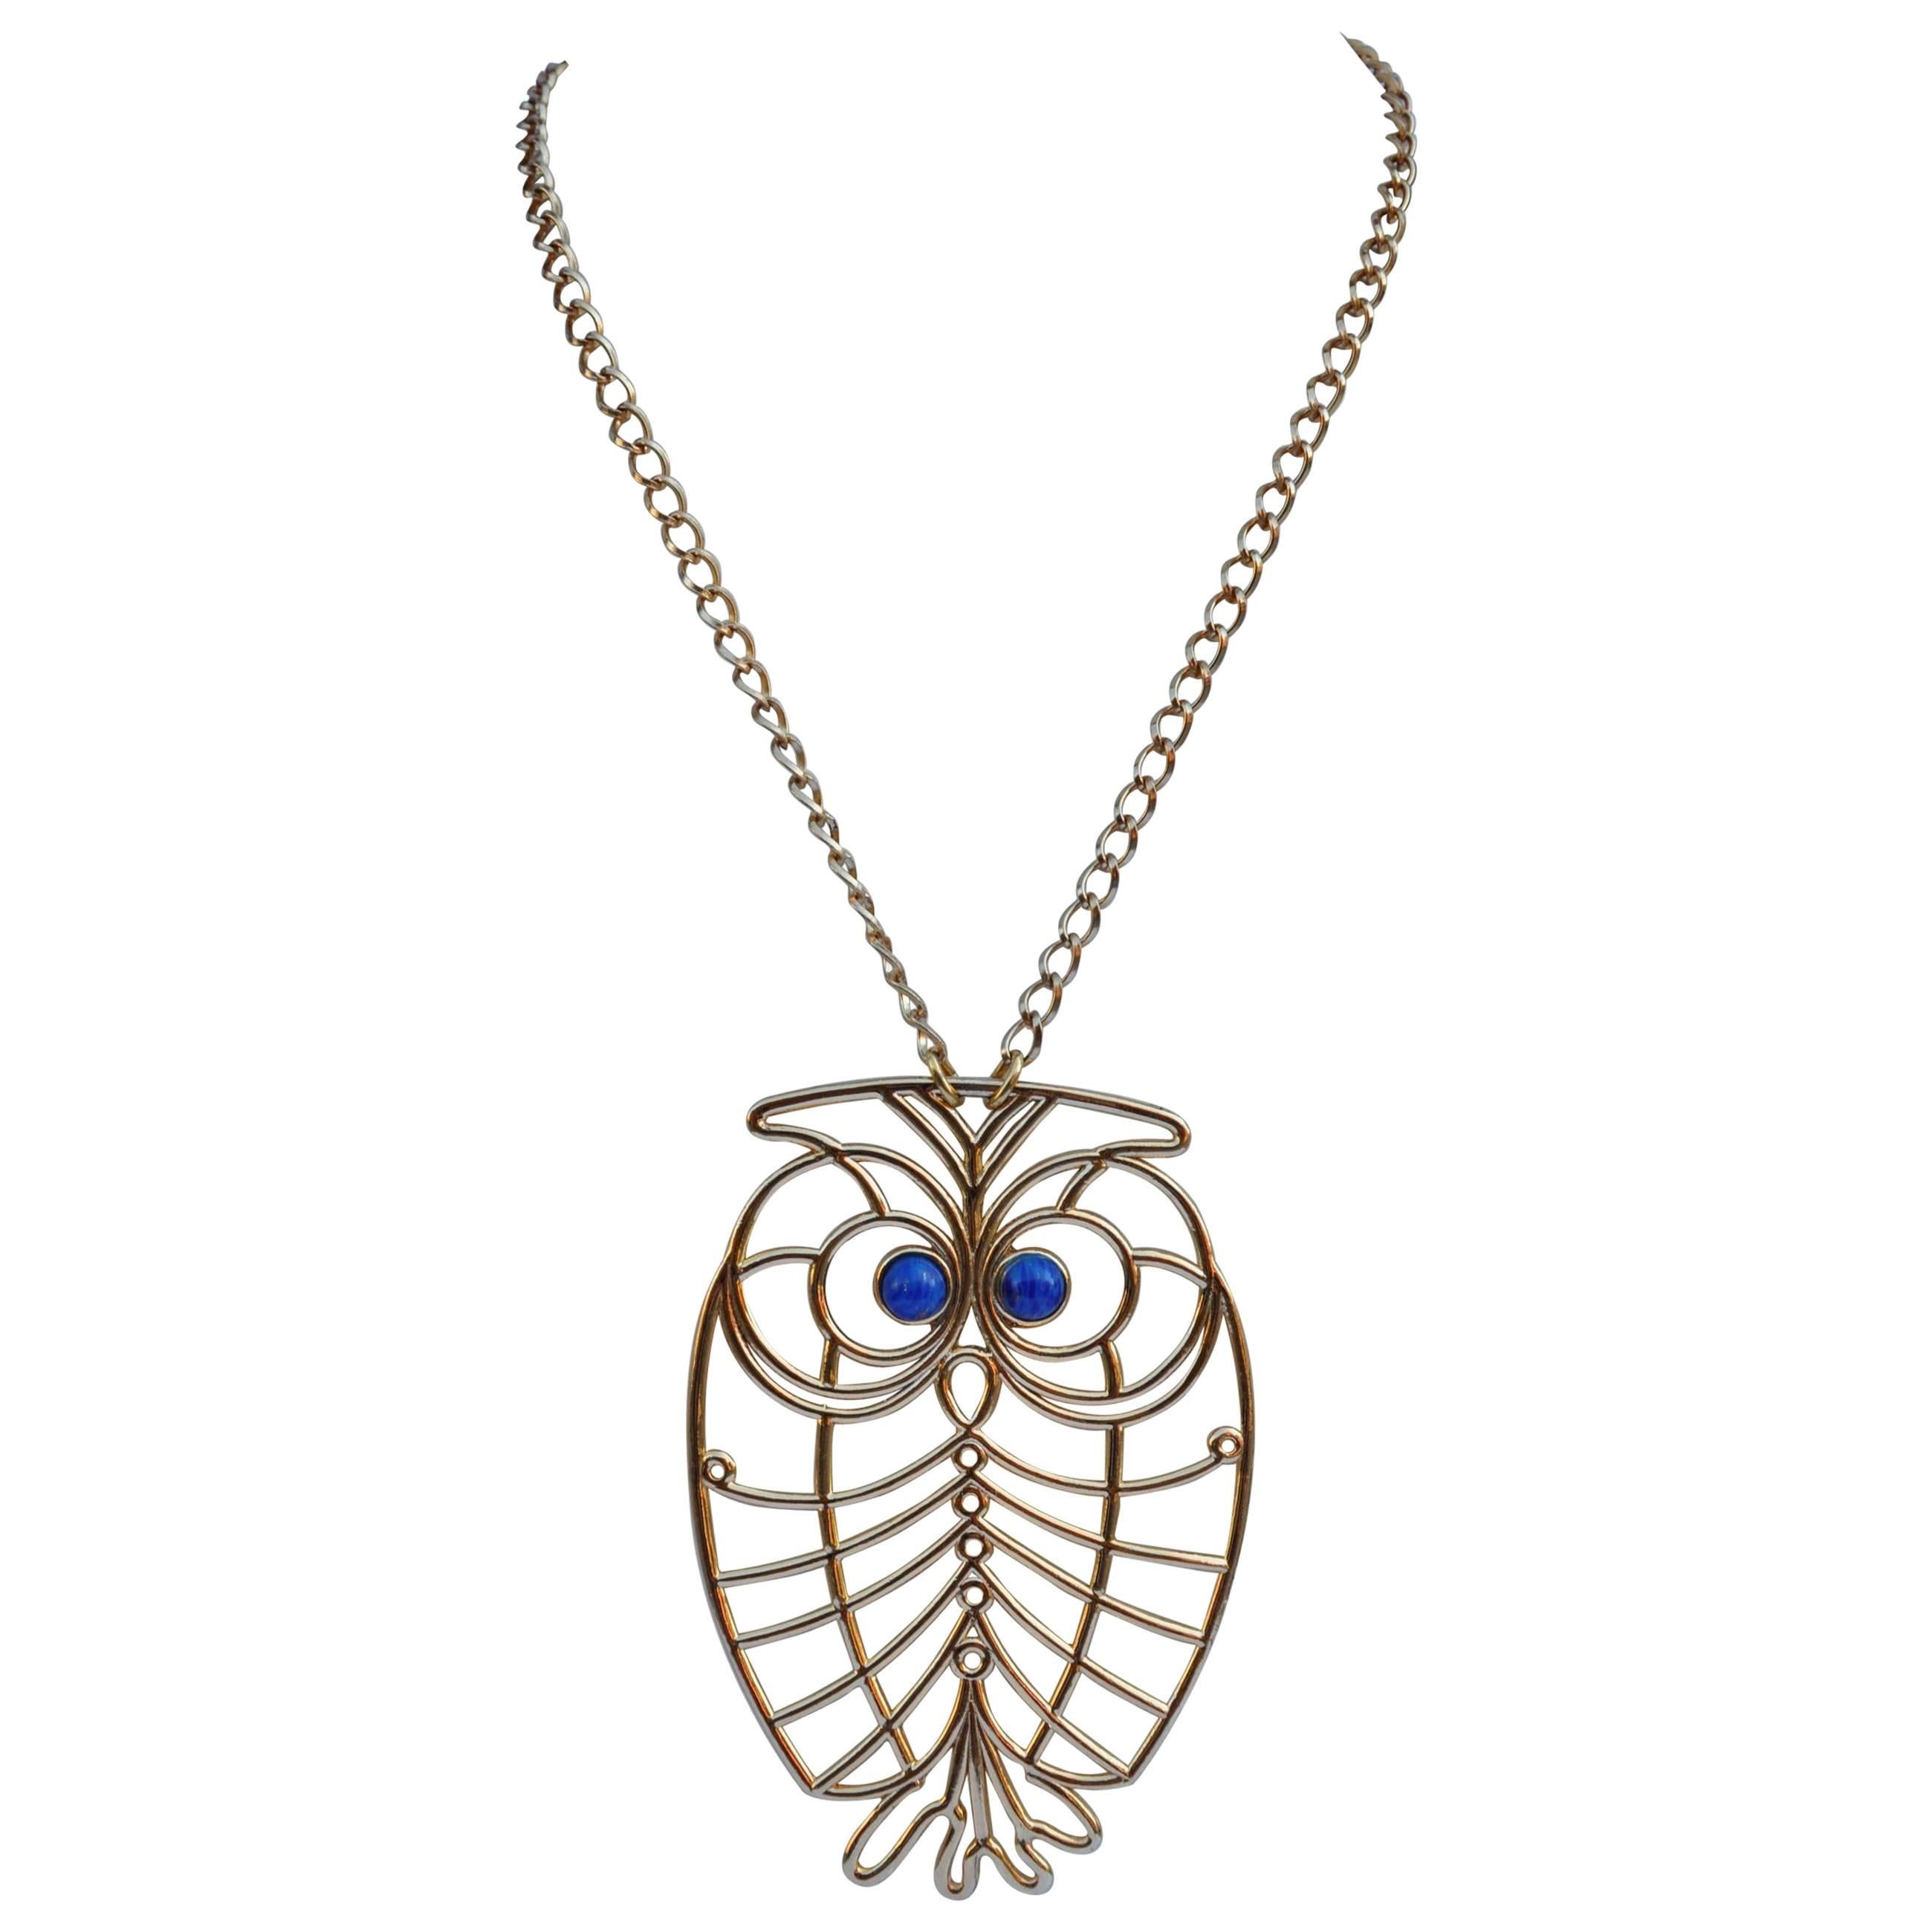 Huge Napier "Owl" Gold Tone Pendant with Necklace For Sale